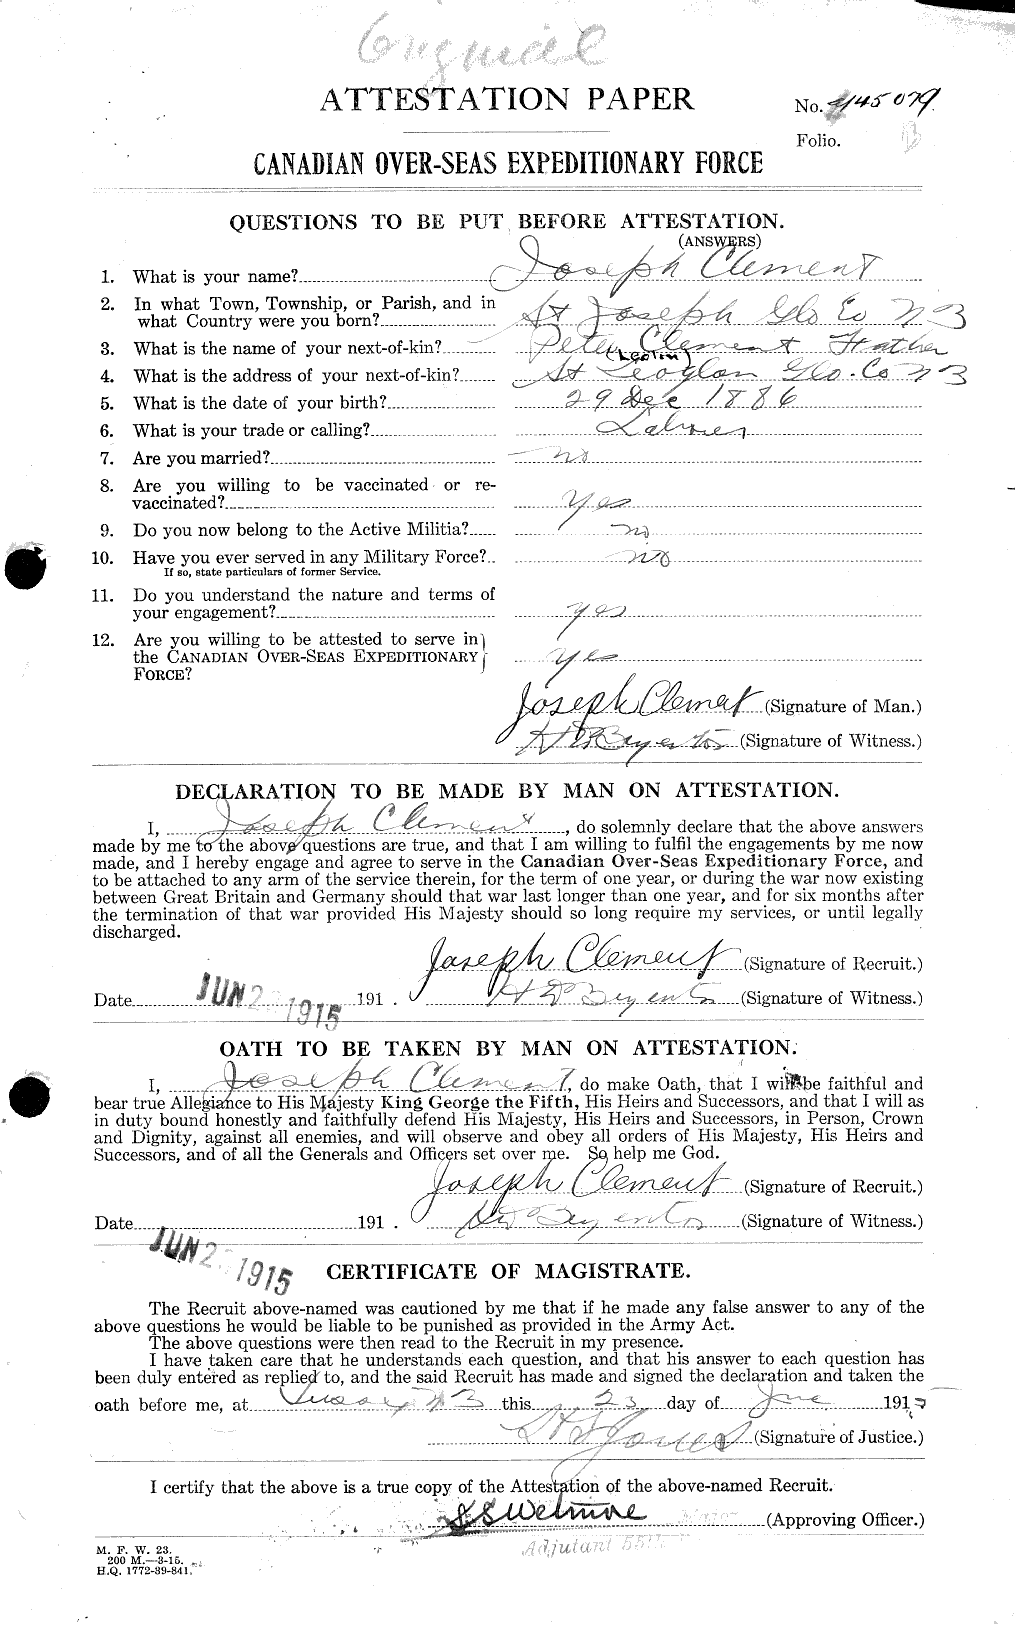 Personnel Records of the First World War - CEF 023877a